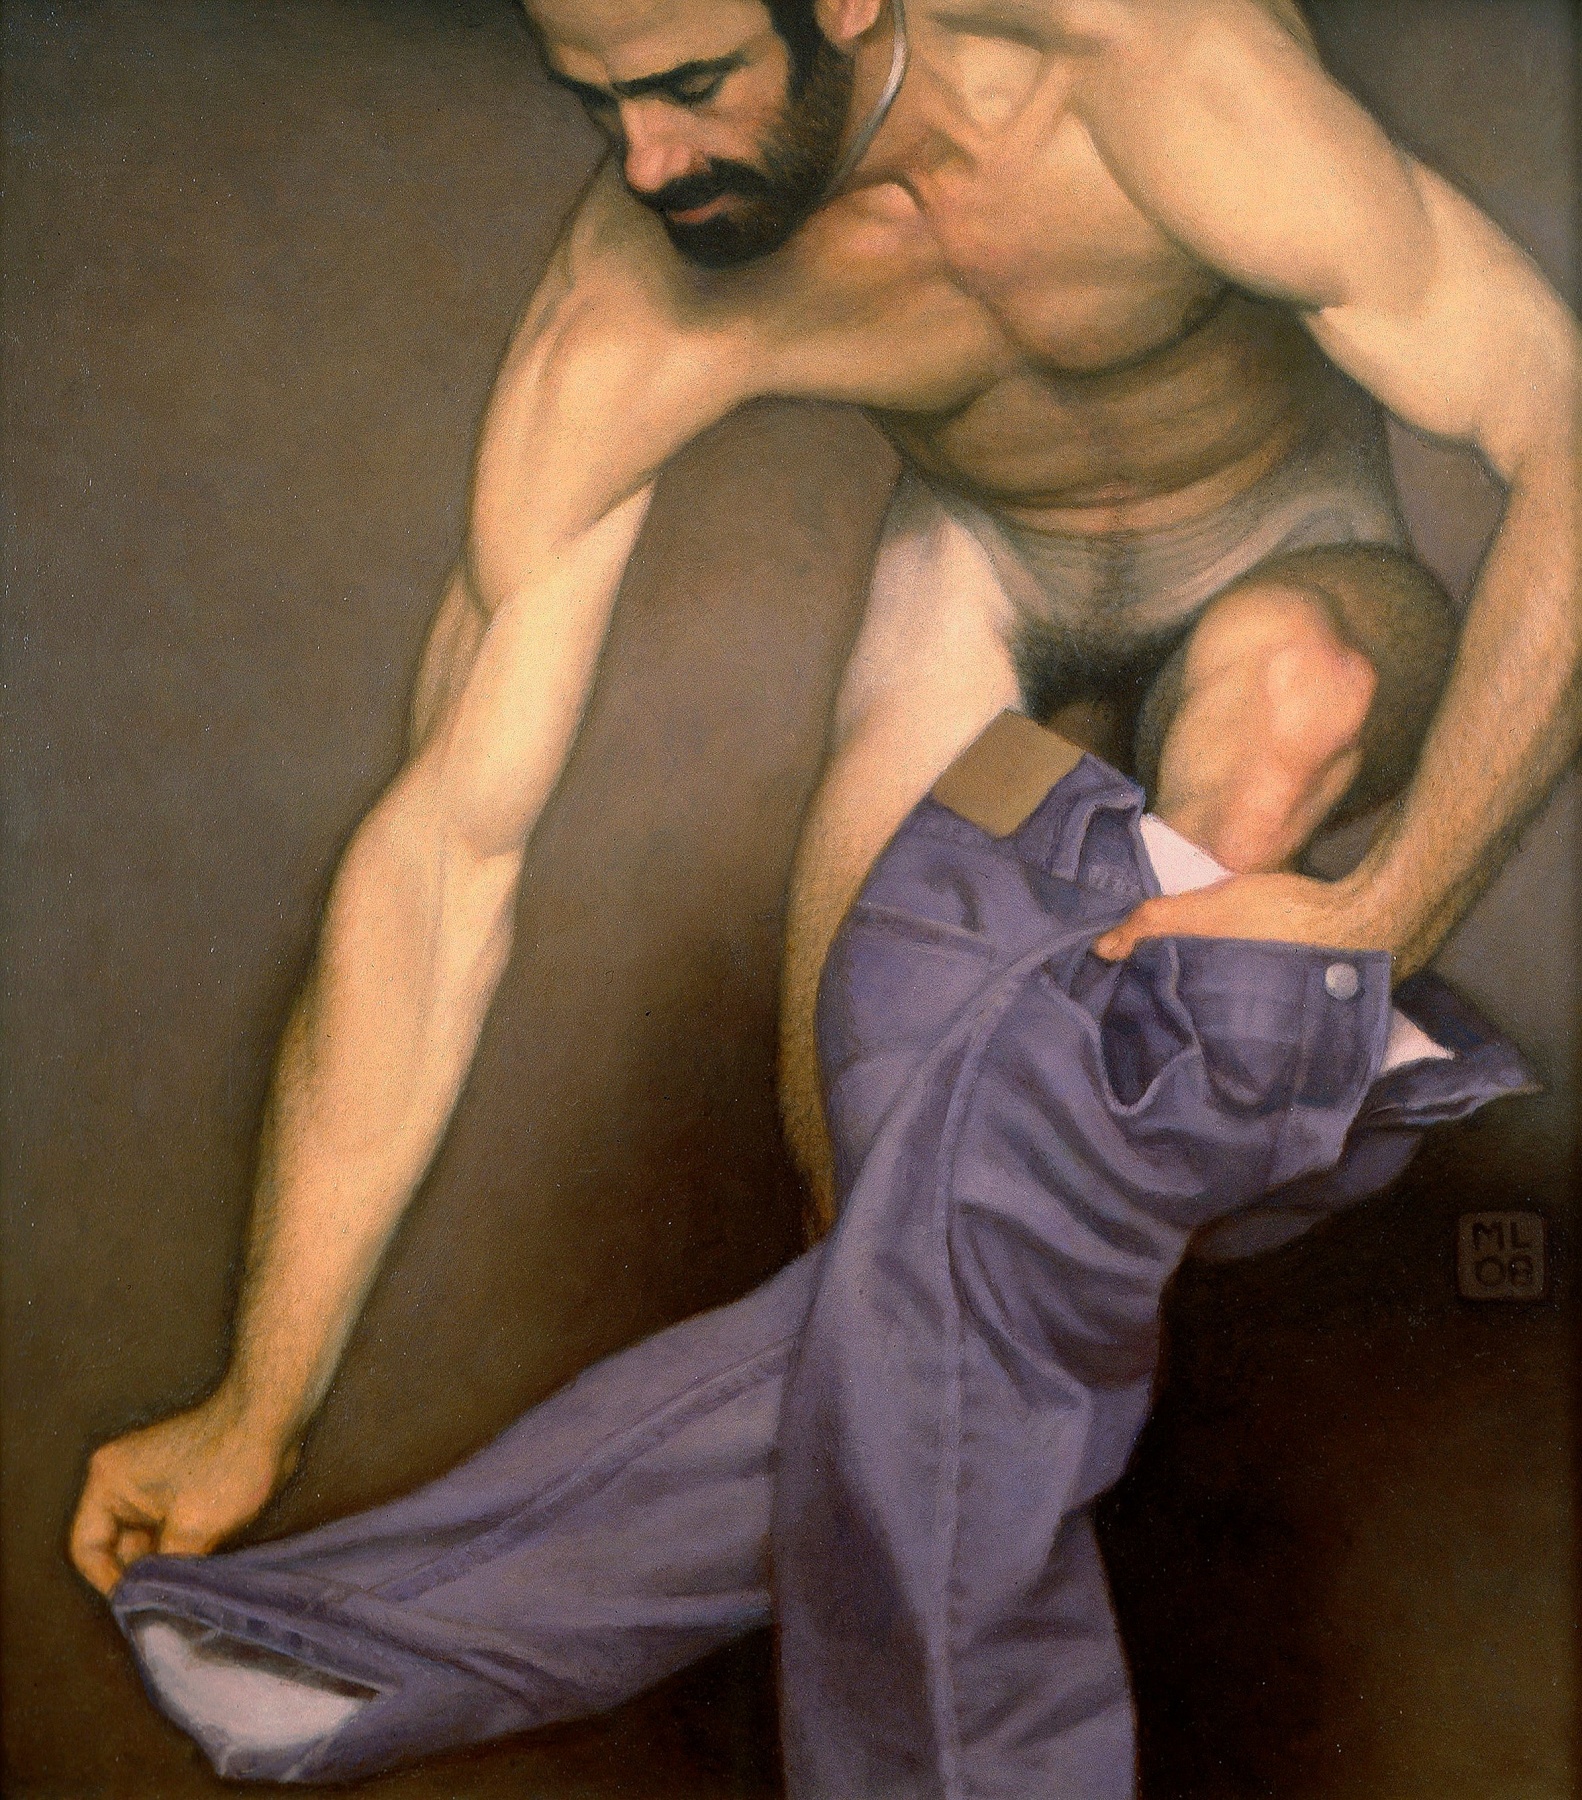 Michael Leonard, Climbing Out, 2008, alkyd-oil on masonite, 24 x 22 inches